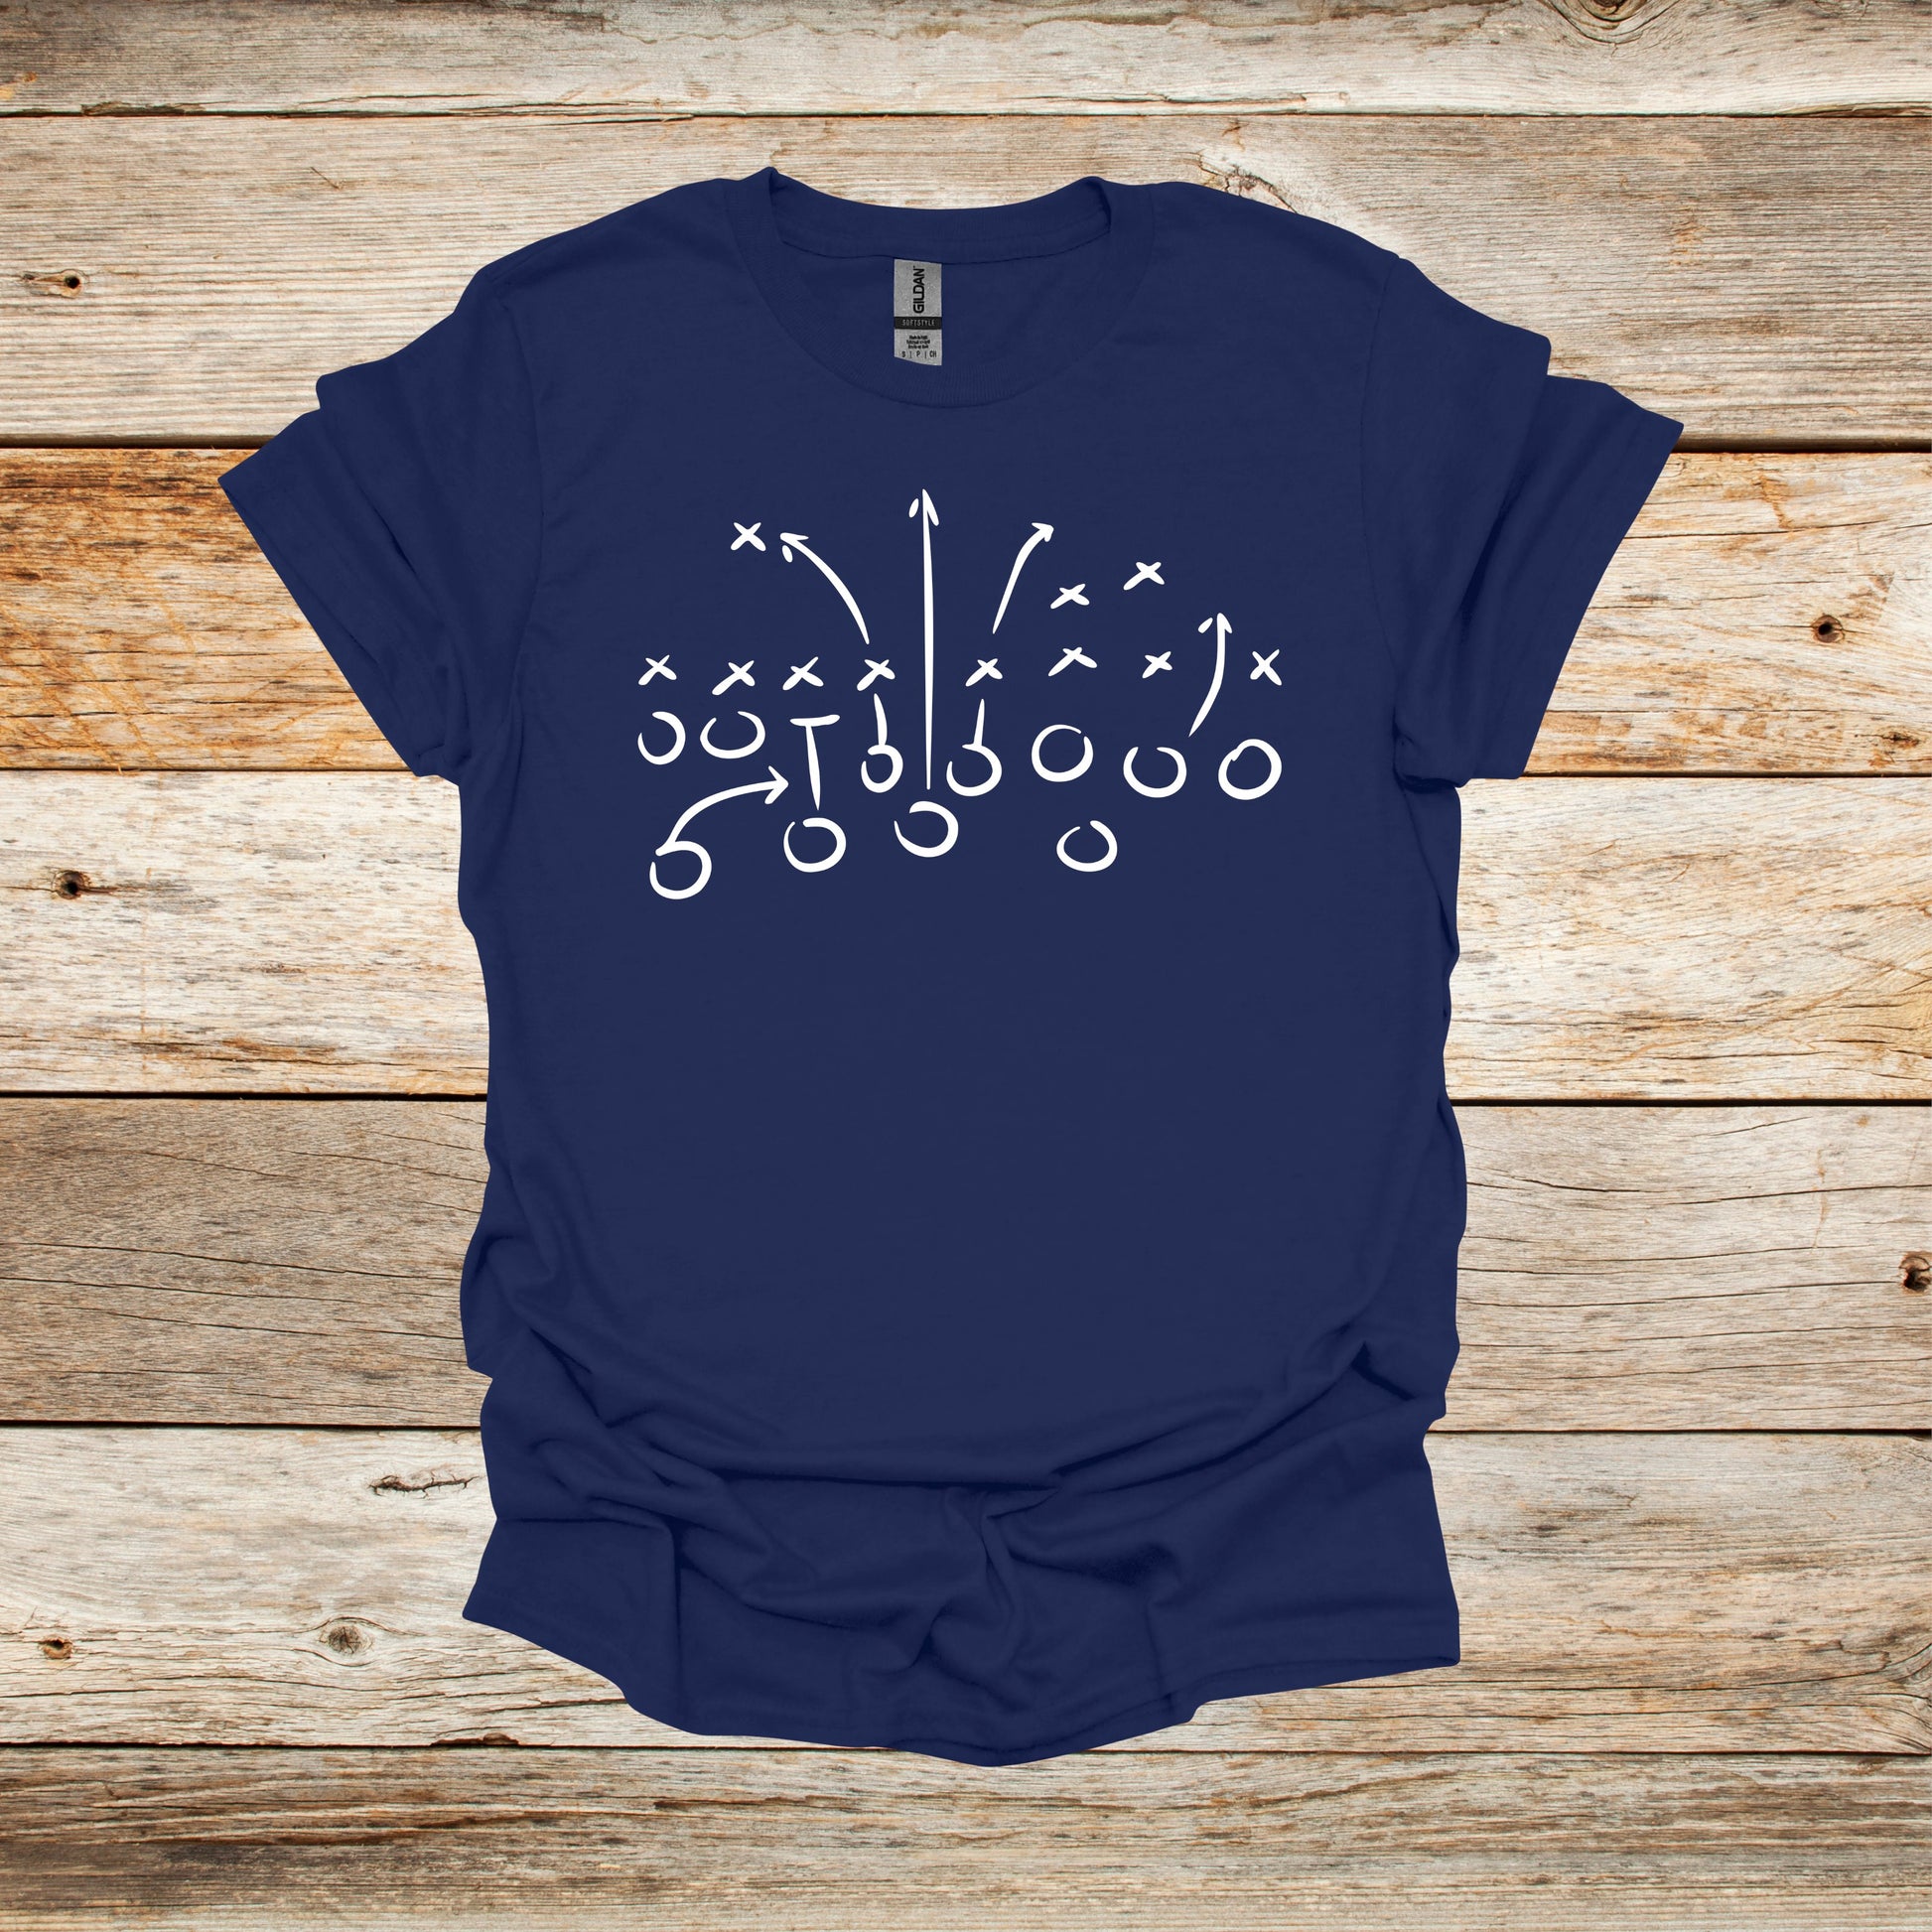 Football T-Shirt - Playbook - Adult and Children's Tee Shirts - Sports T-Shirts Graphic Avenue Navy Adult Small 